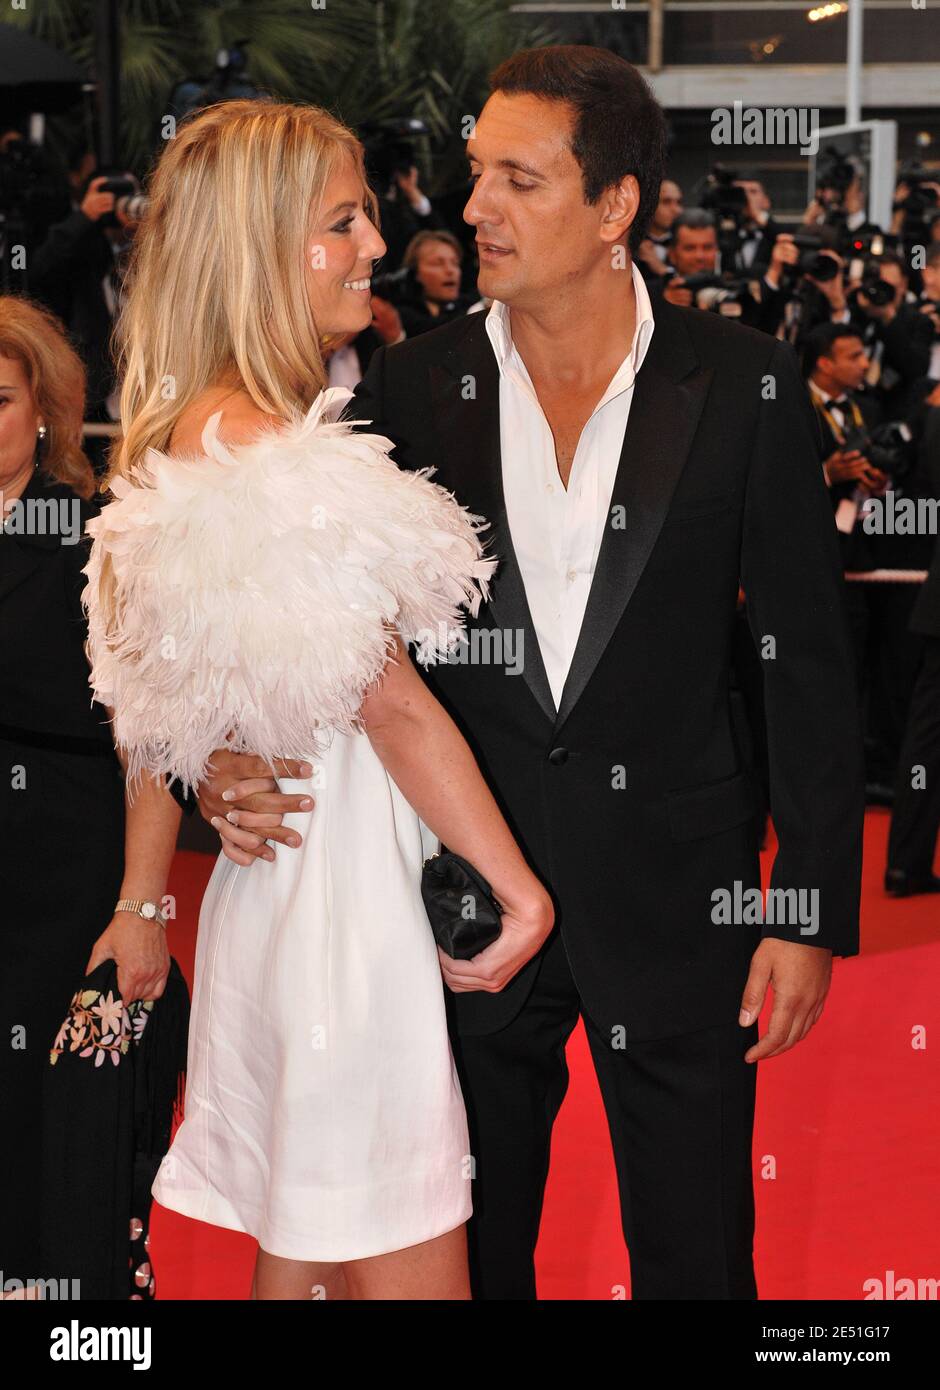 Dany Brillant and his girlfriend Nathalie Moury arriving at the Palais des  Festivals in Cannes, South of France, May 17, 2008, for the screening of  Woody Allen's Vicky Cristina Barcelona presented out